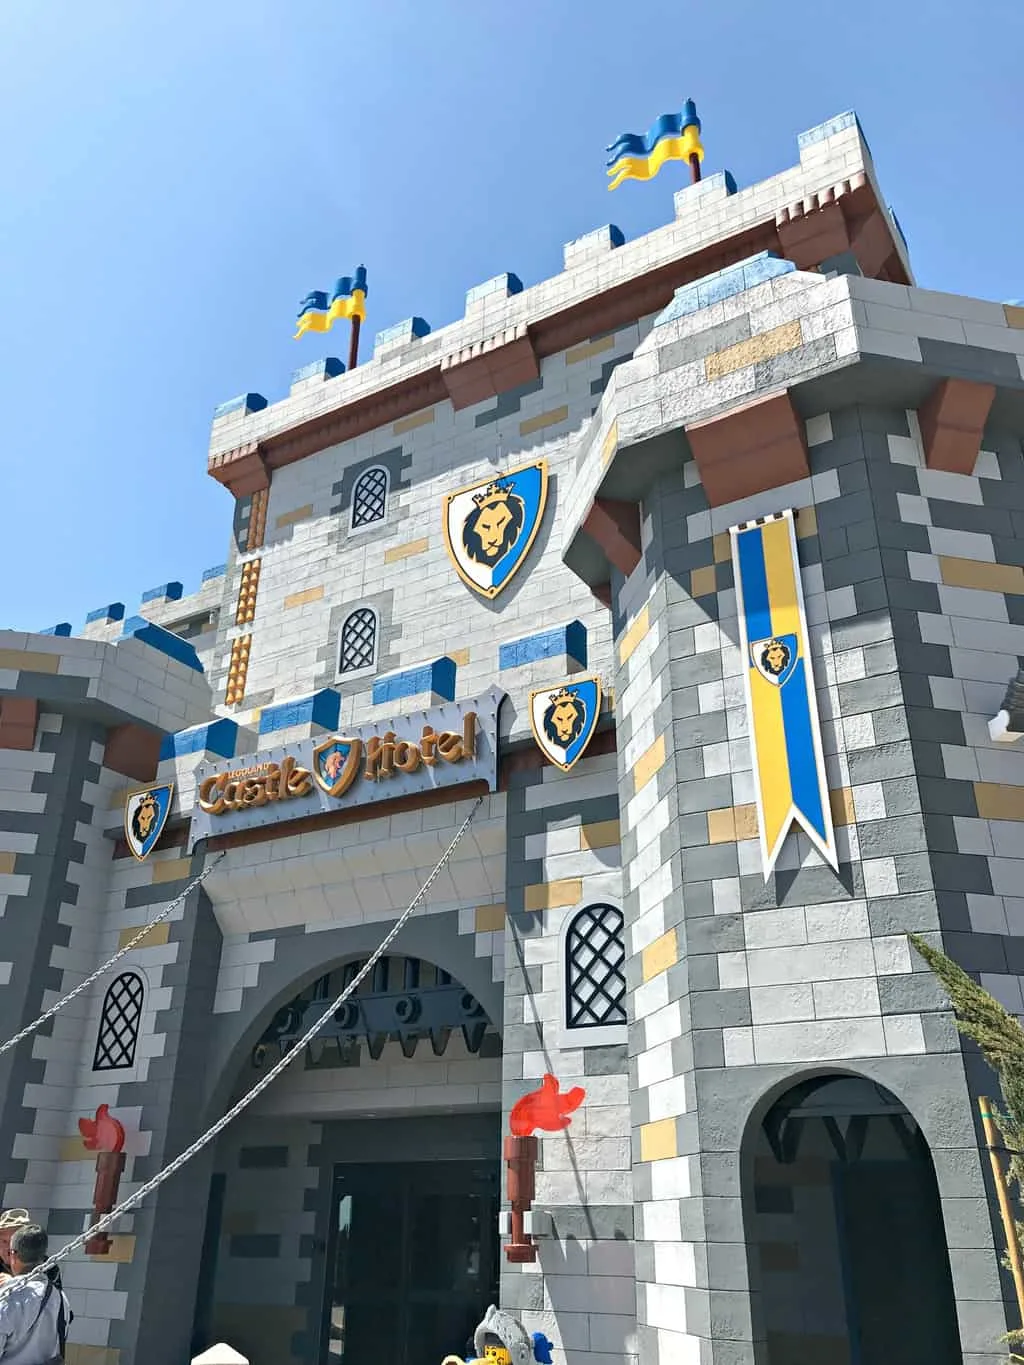 Outside view of the LEGOLAND Castle Hotel